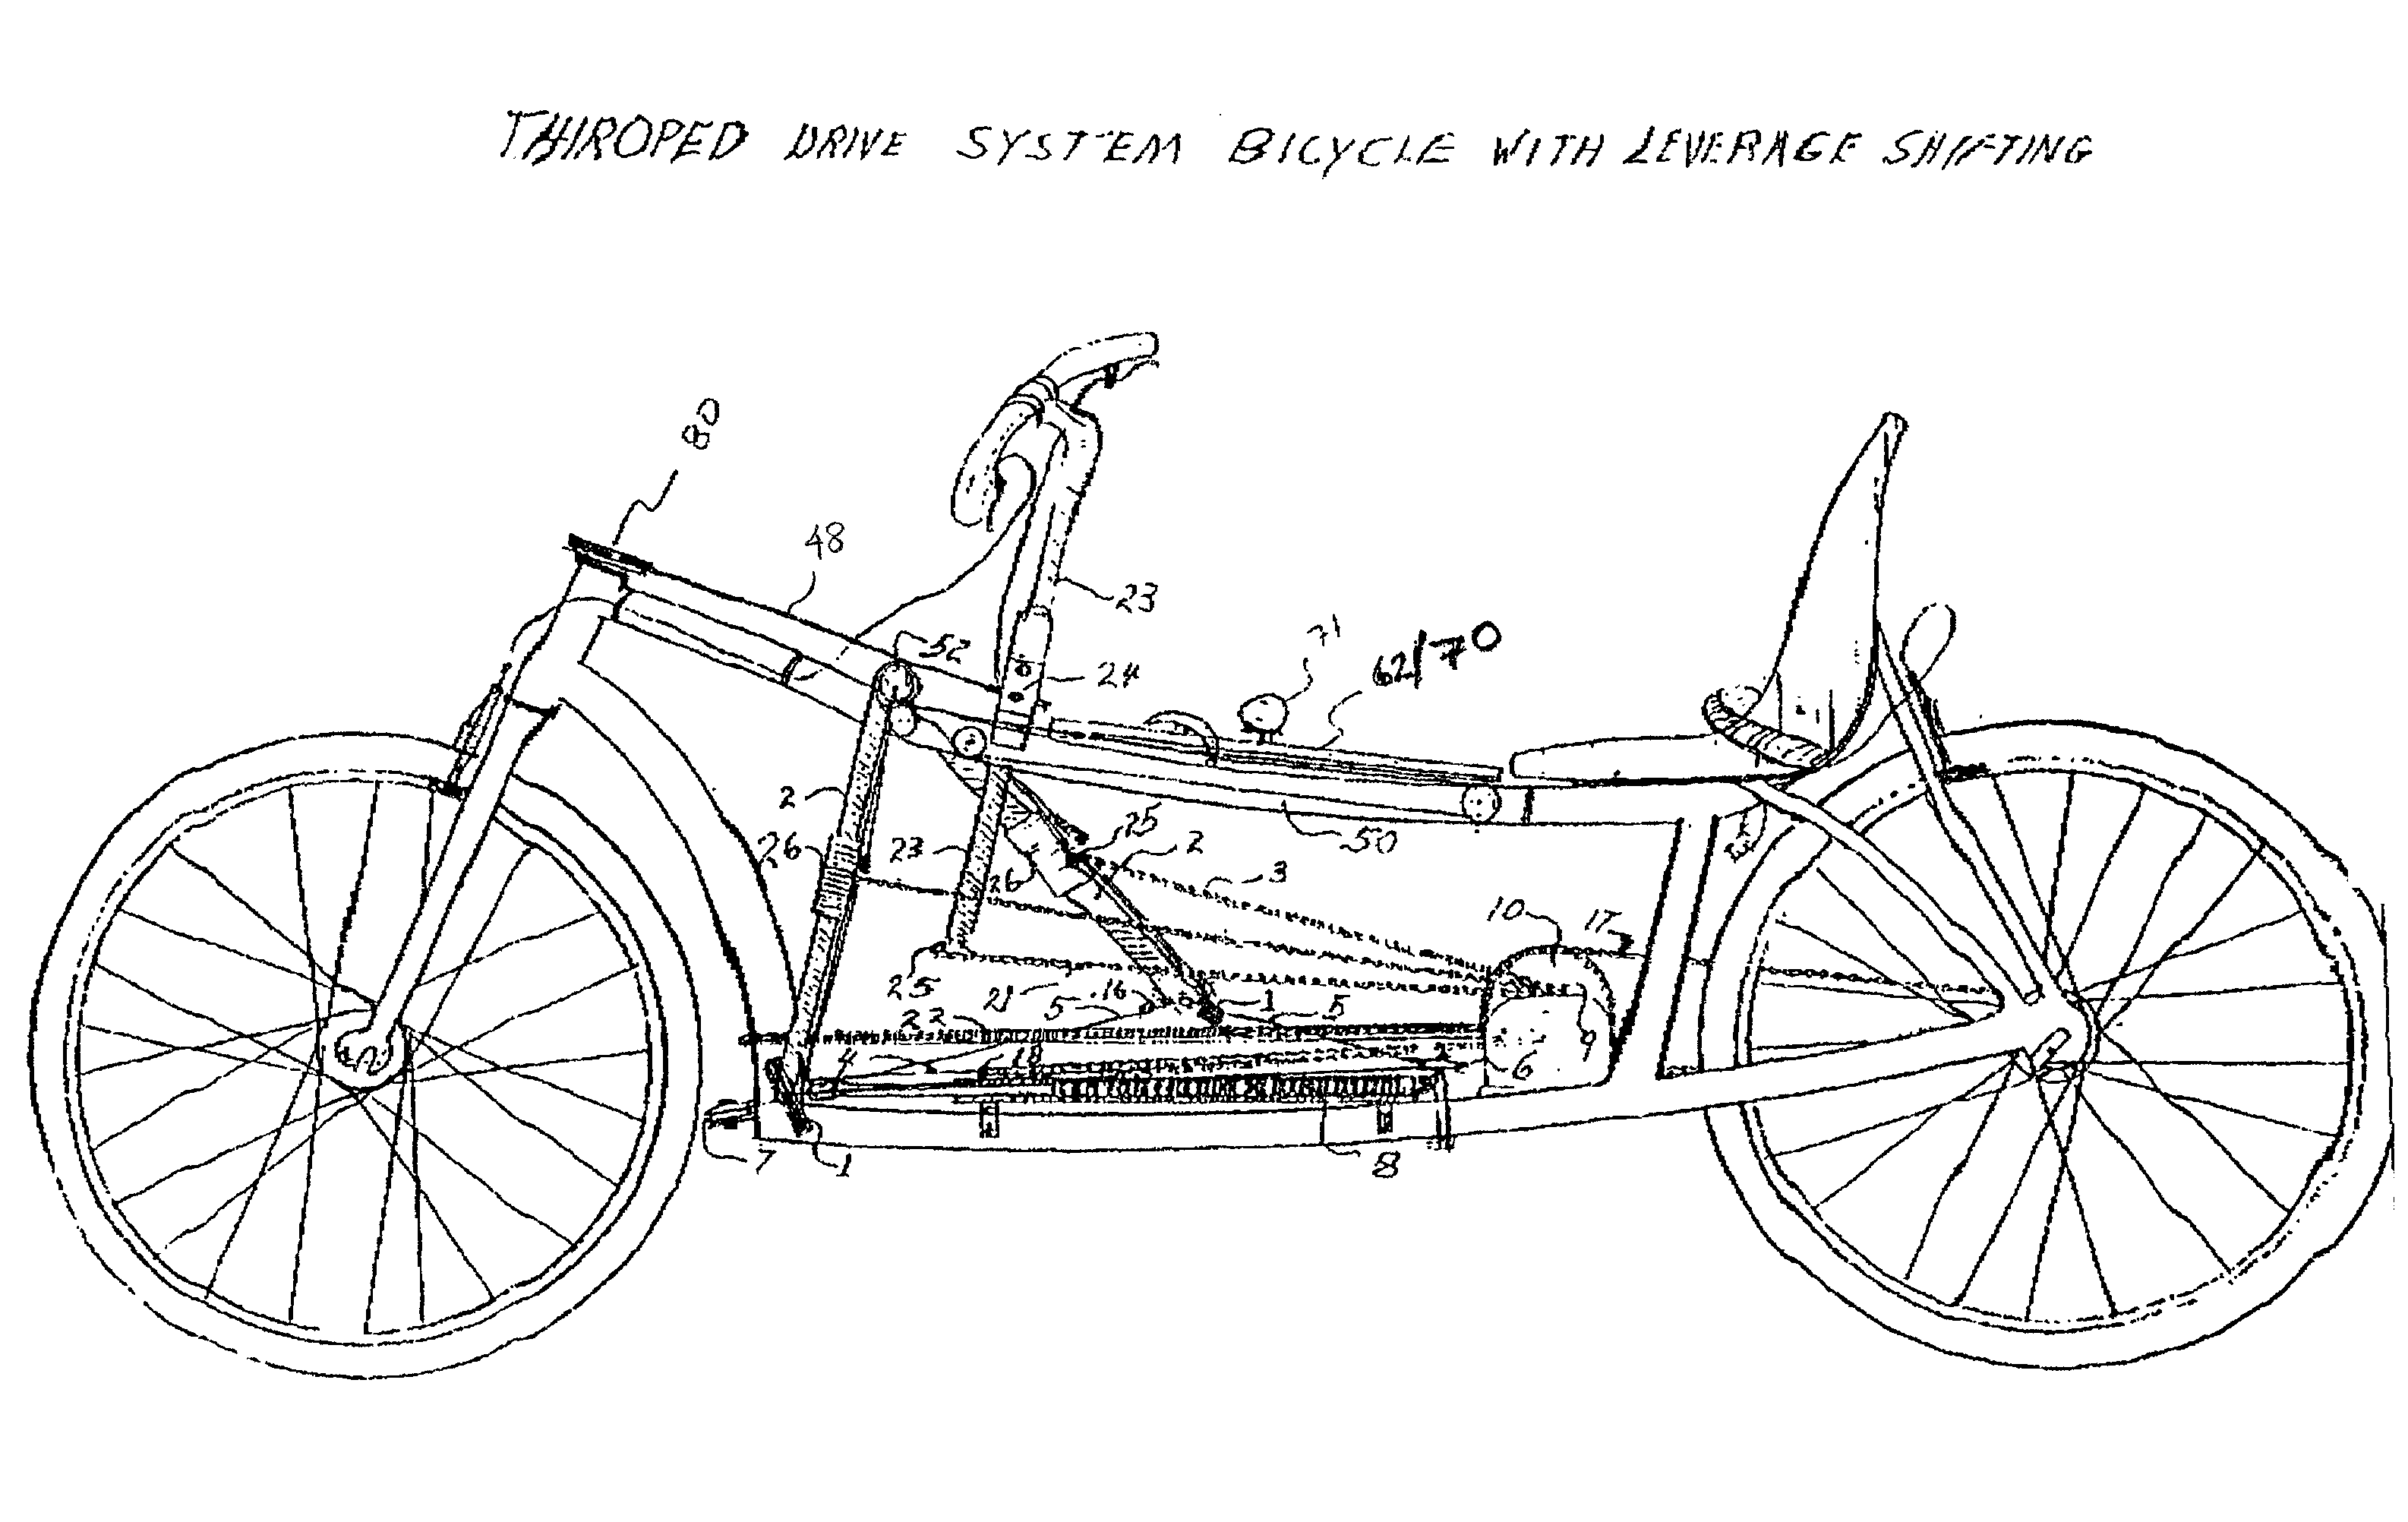 Bicycle pedaling power unit with leverage shifting